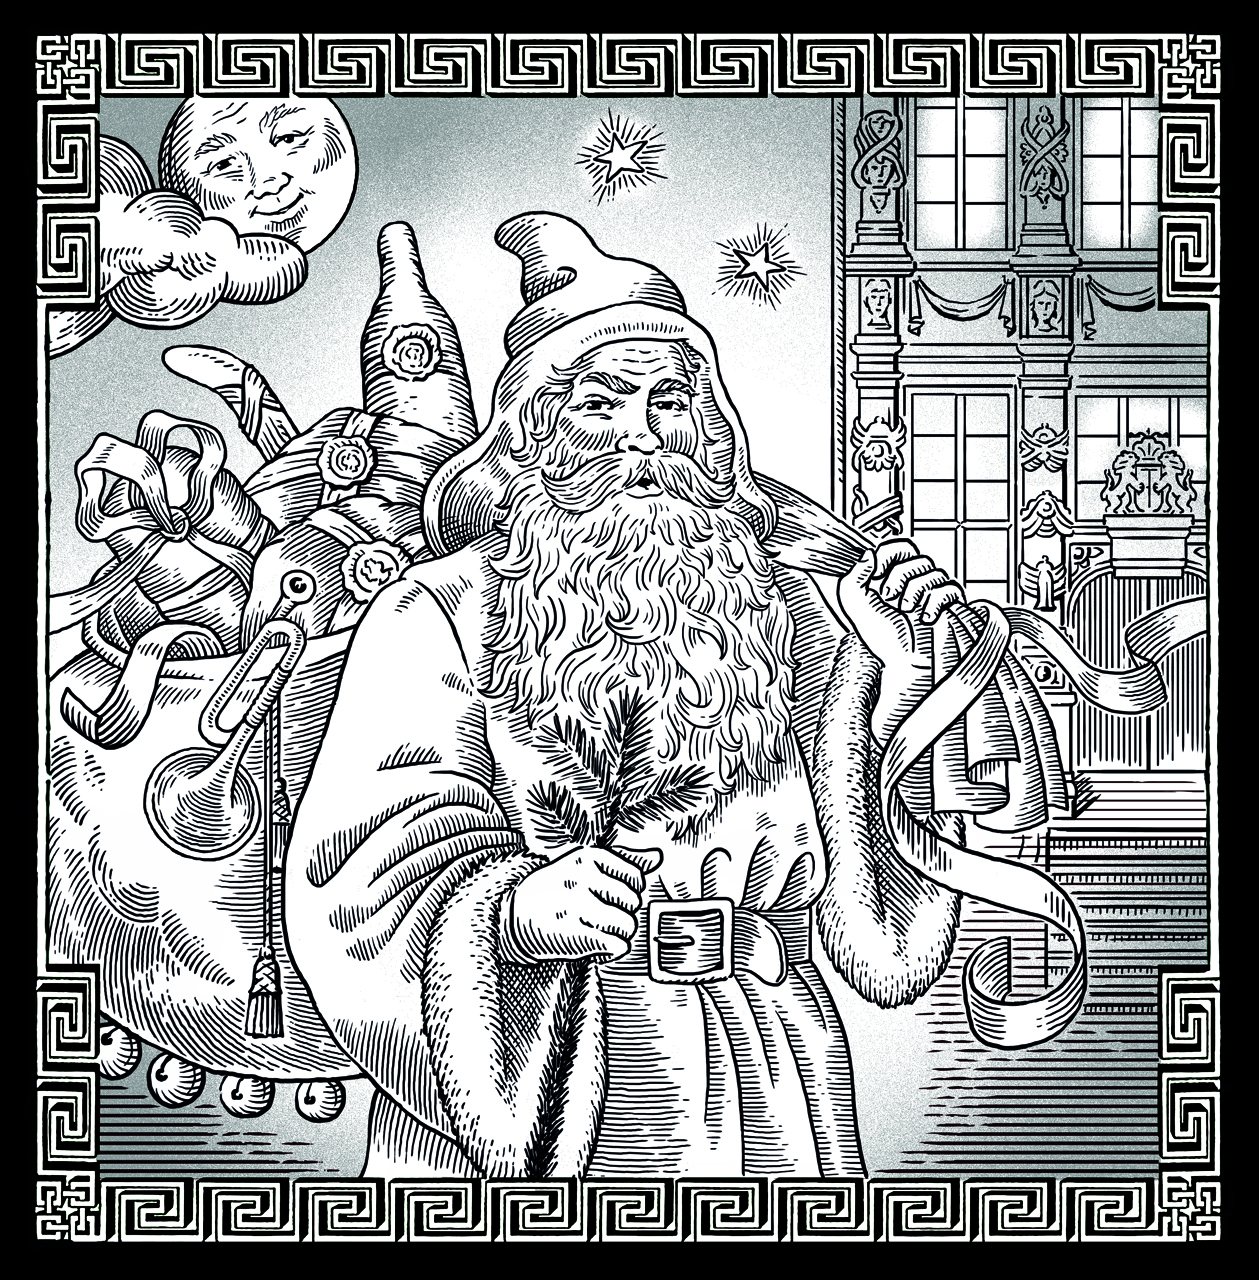 Illustrations for a label Goder Aftonglögg with Santa Claus.